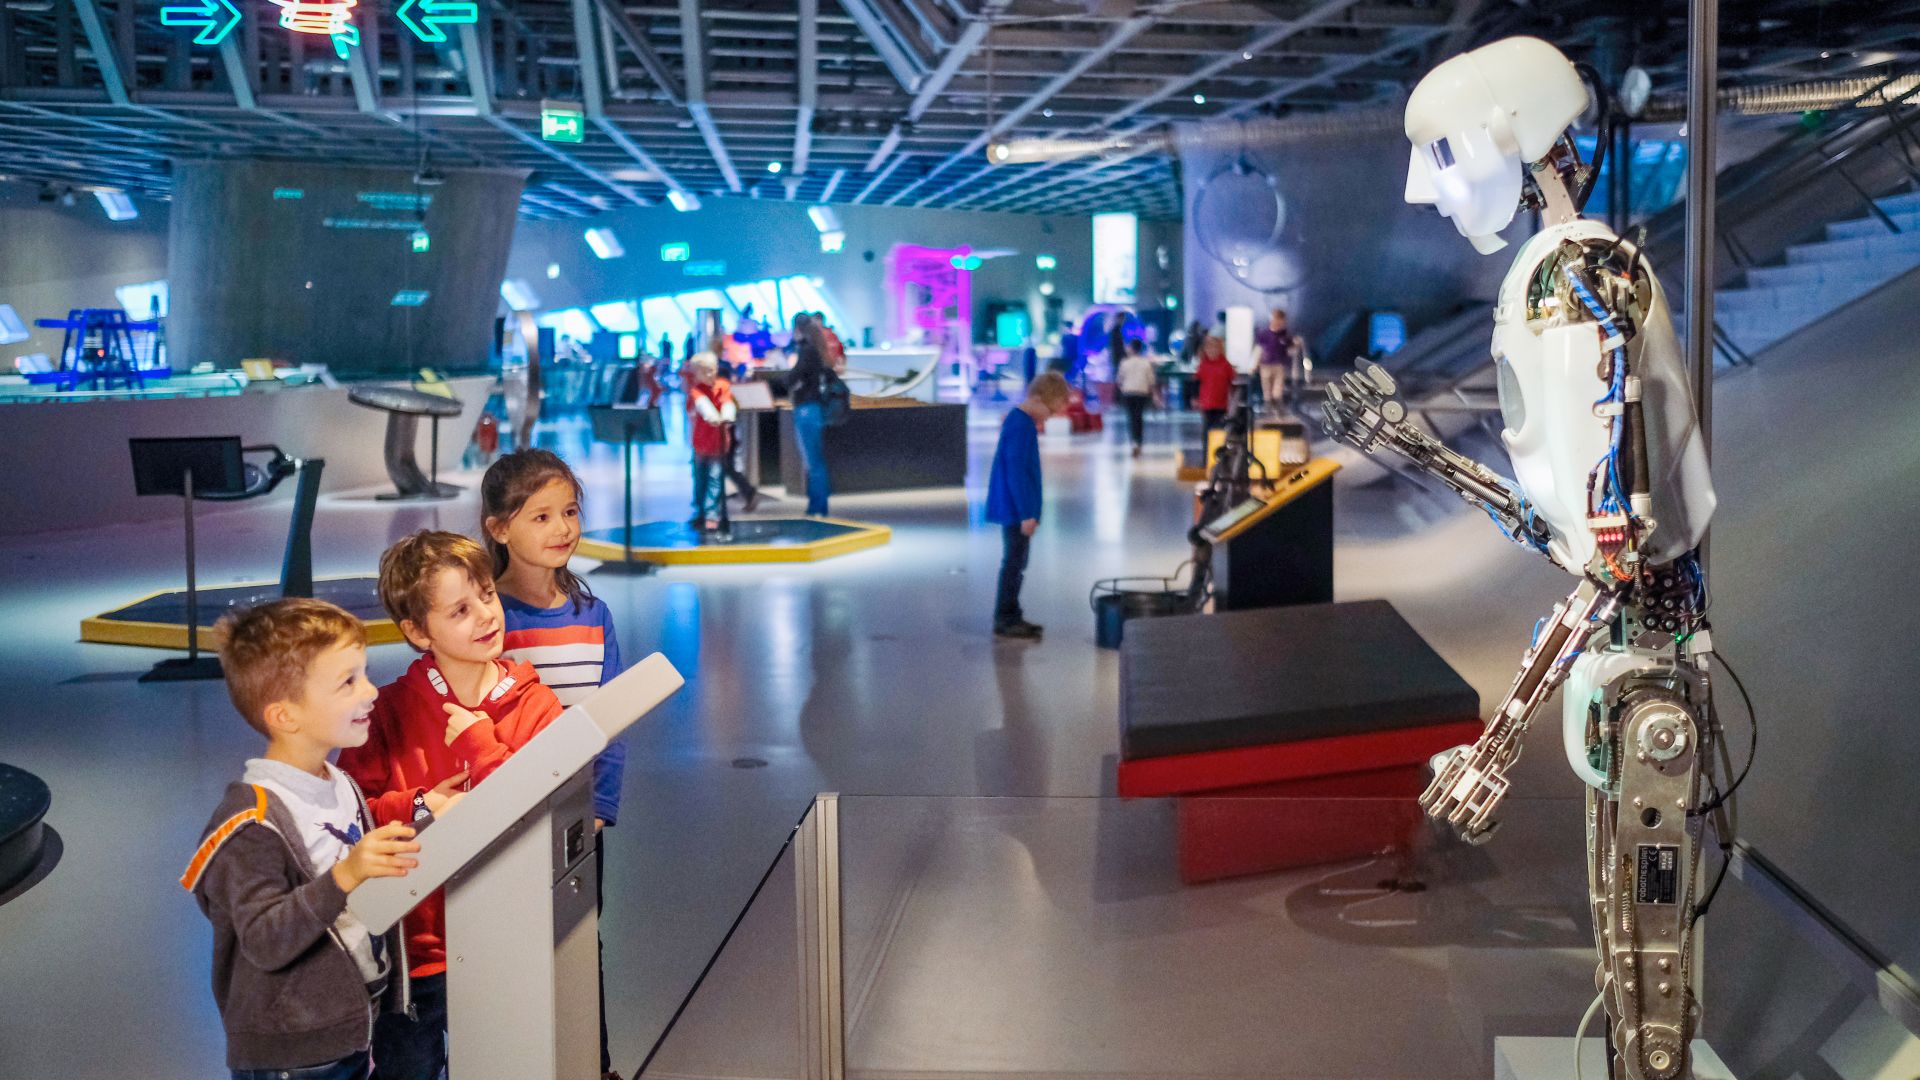 Wolfsburg: Robot talks to guests at the Phaeno science museum